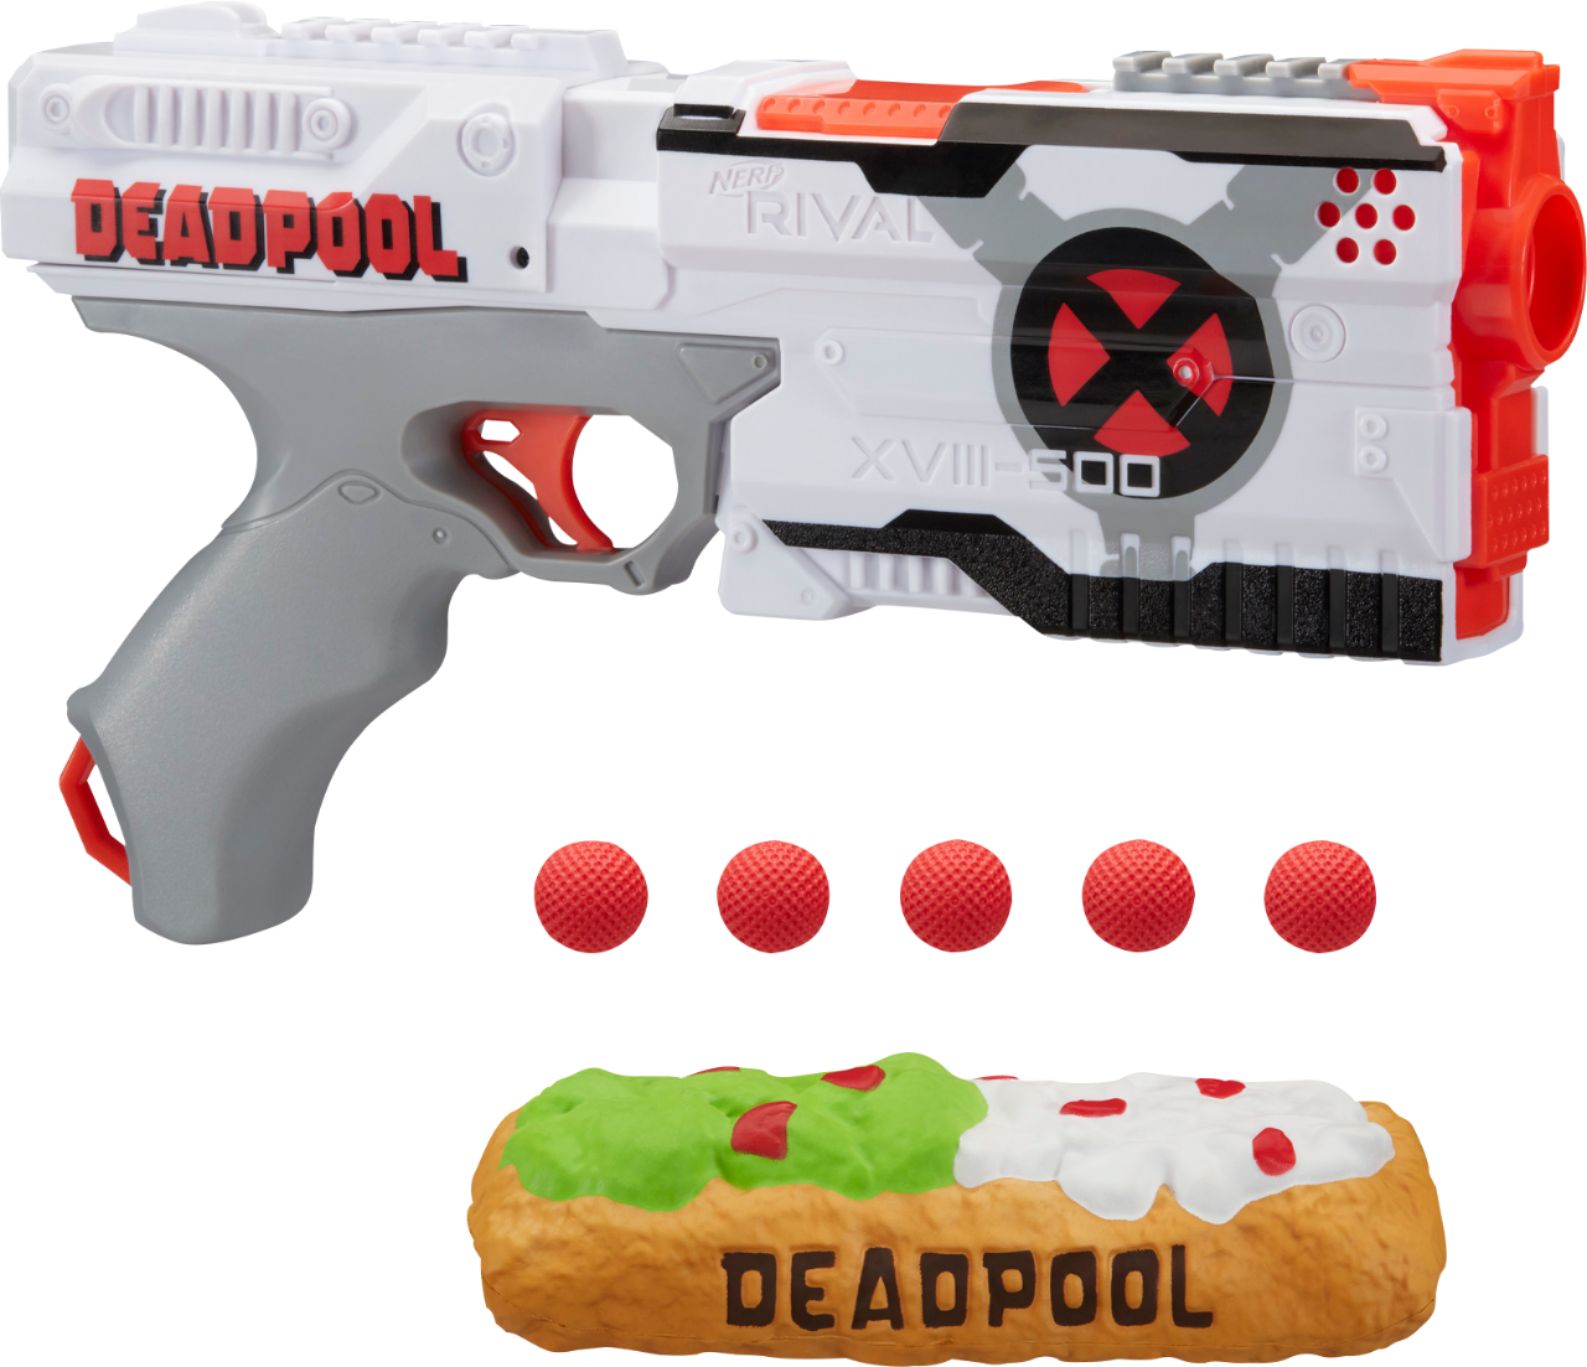 Details about   Nerf Rival Deadpool Kronos XVIII-500 Dual Pack by Hasbro 